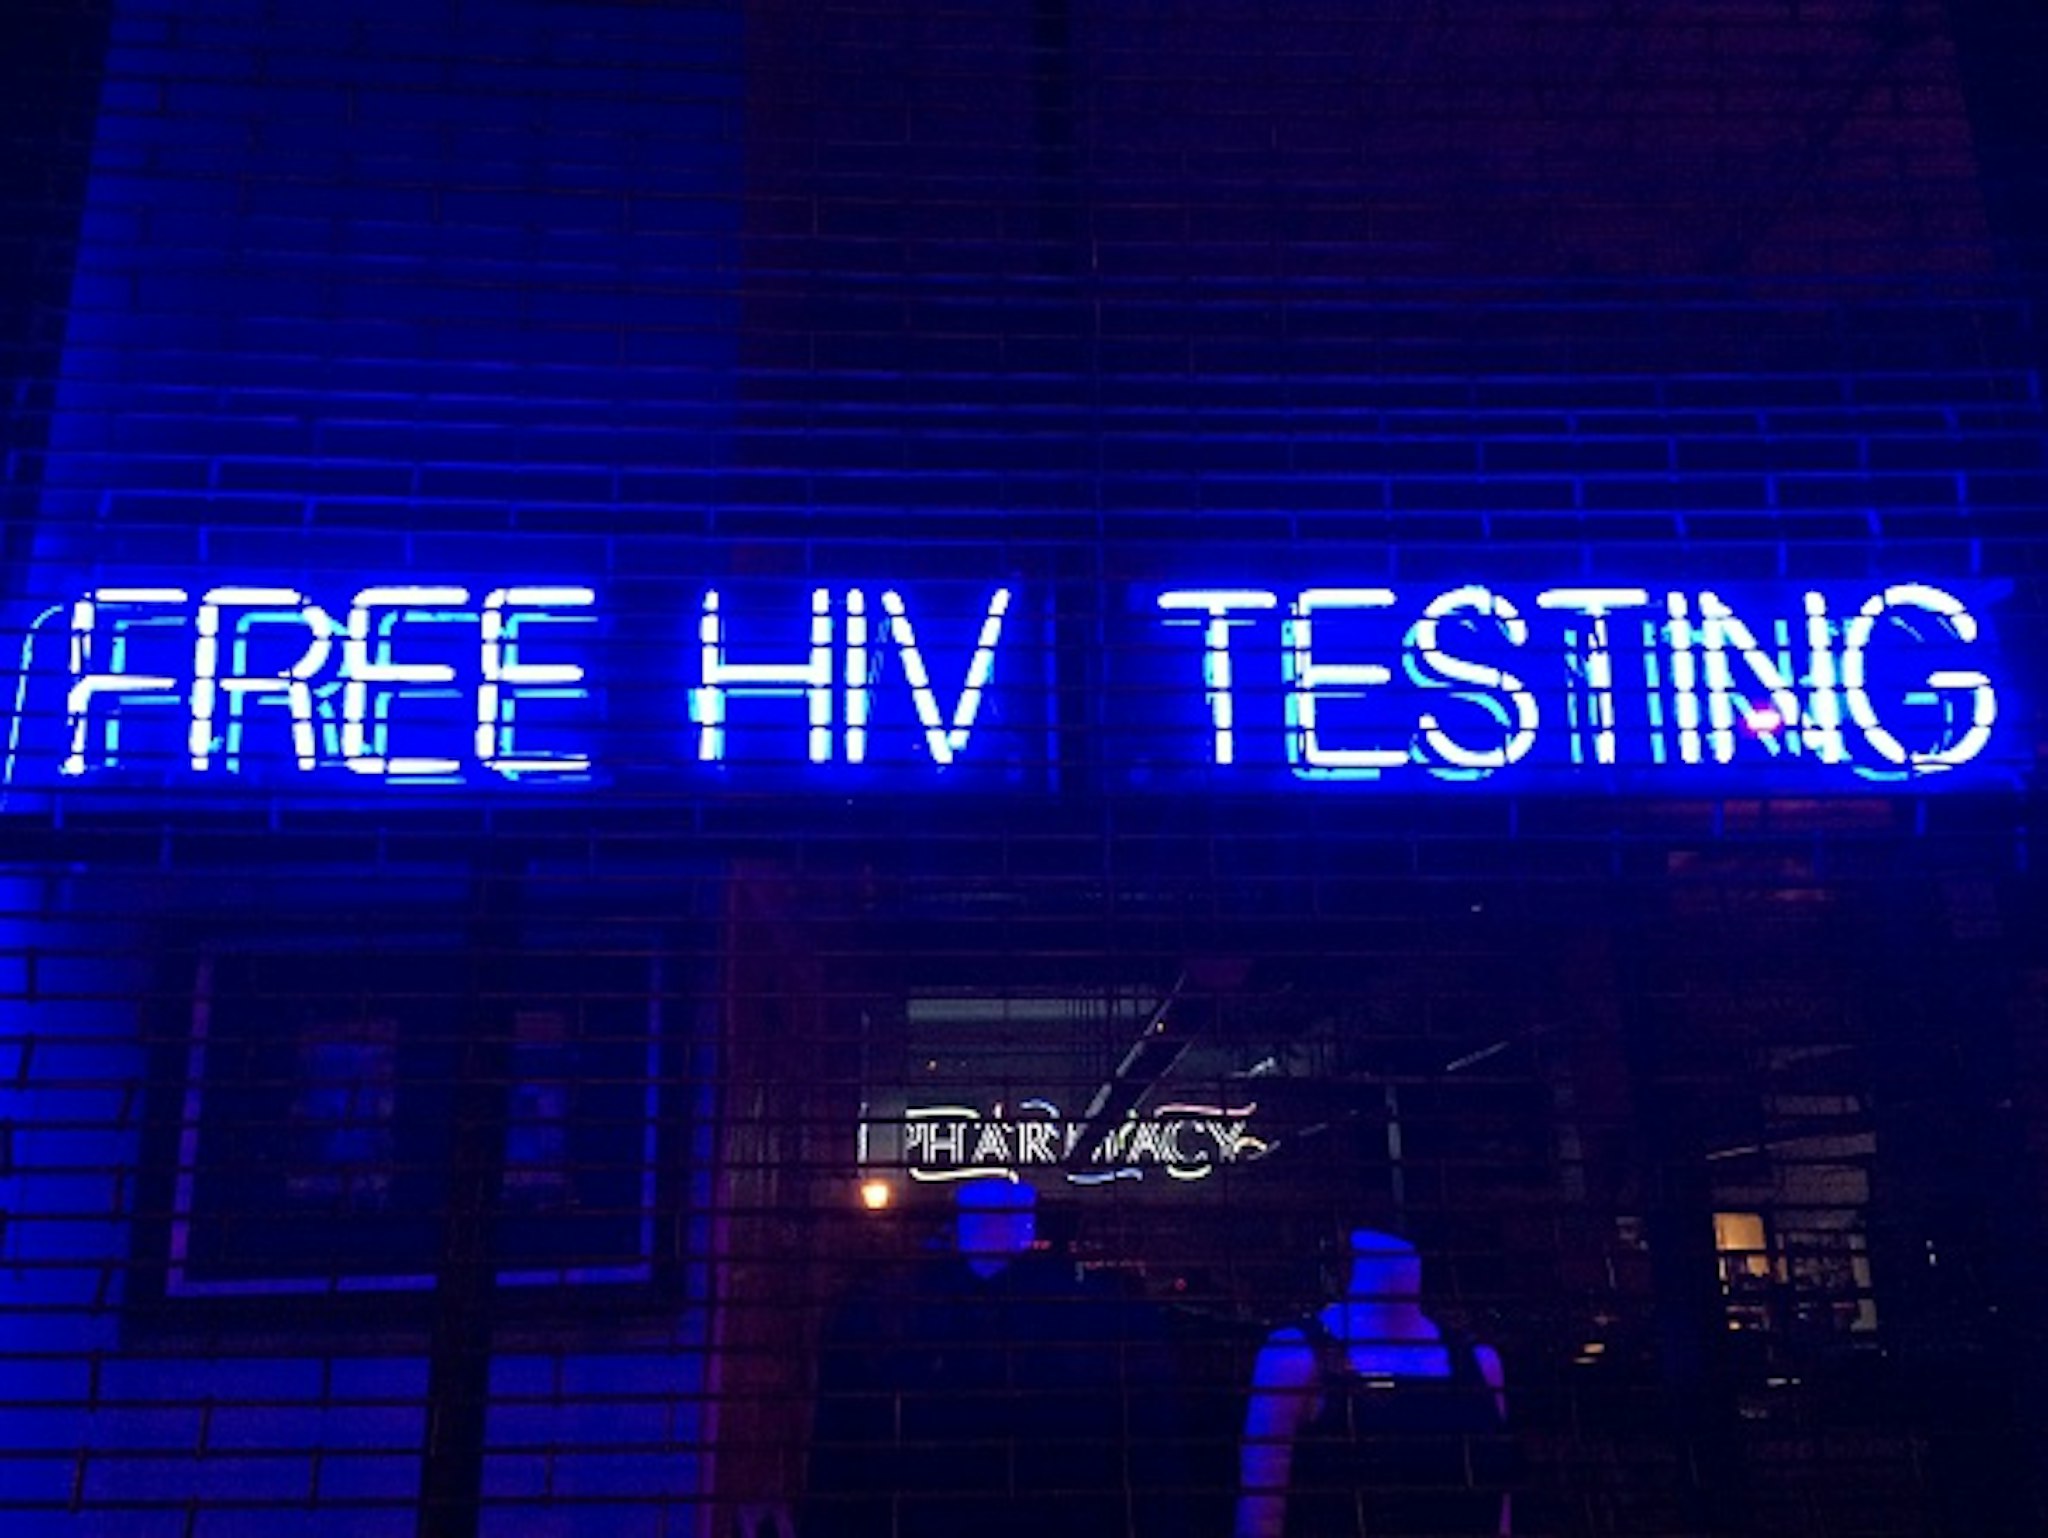 'Free HIV Testing' is spelled out in blue &amp; white neon letters hanging in a storefront window behind security gates in Boerum Hill, Brooklyn, NYC - March 9, 2015